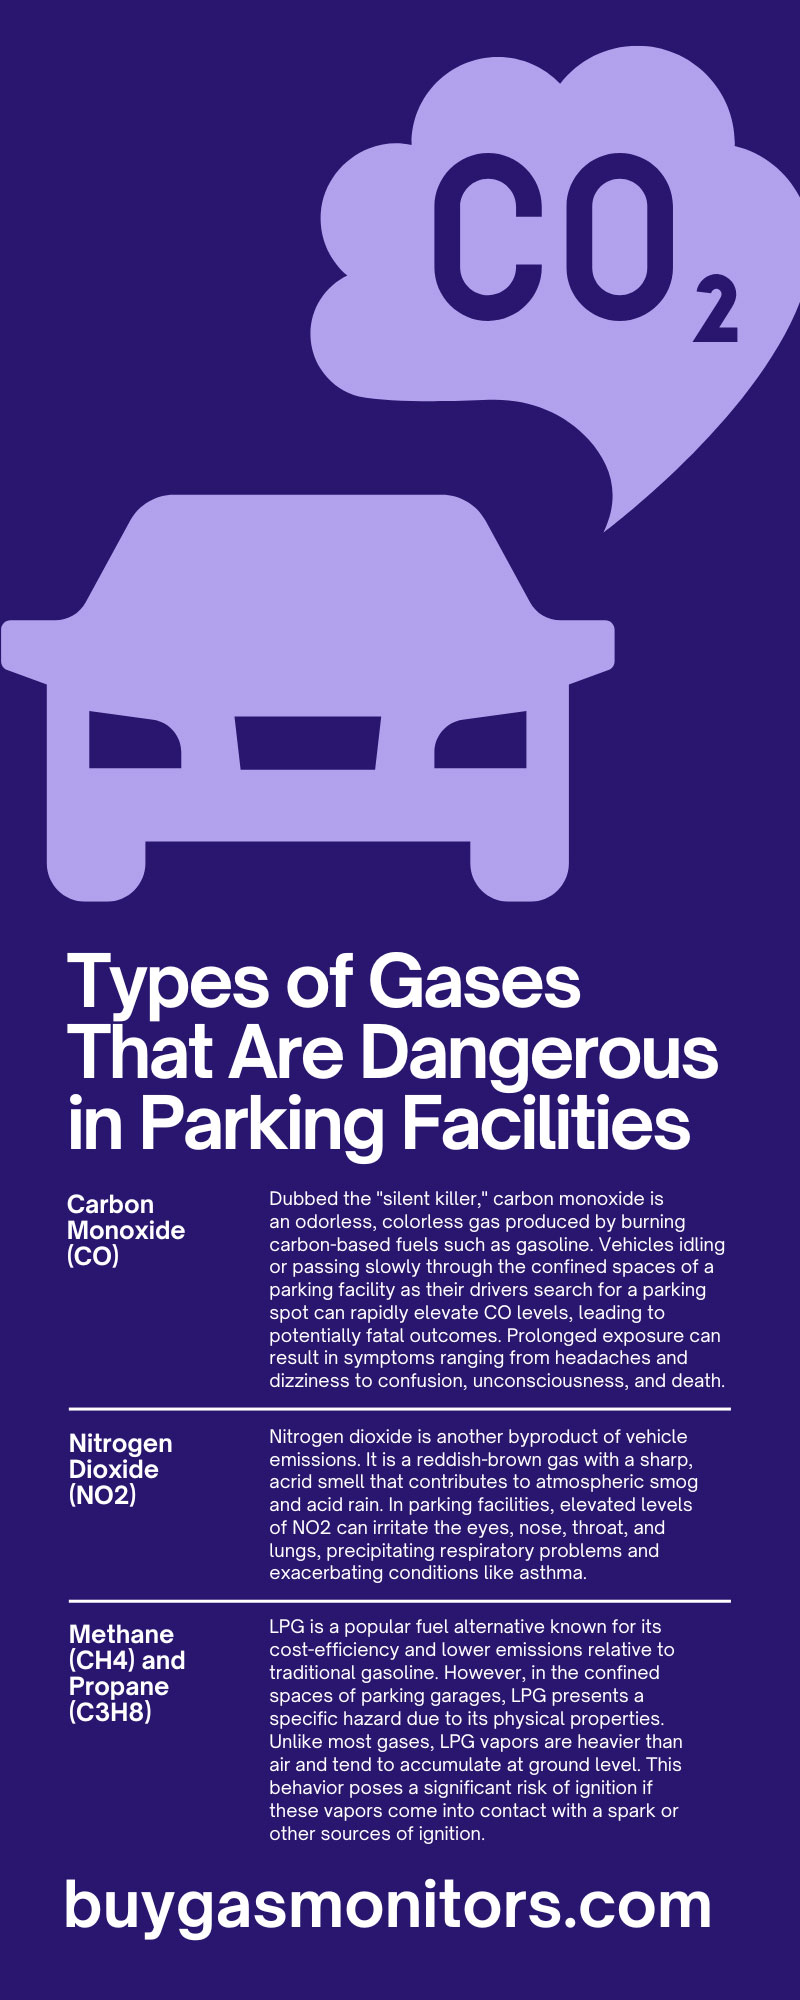 Types of Gases That Are Dangerous in Parking Facilities